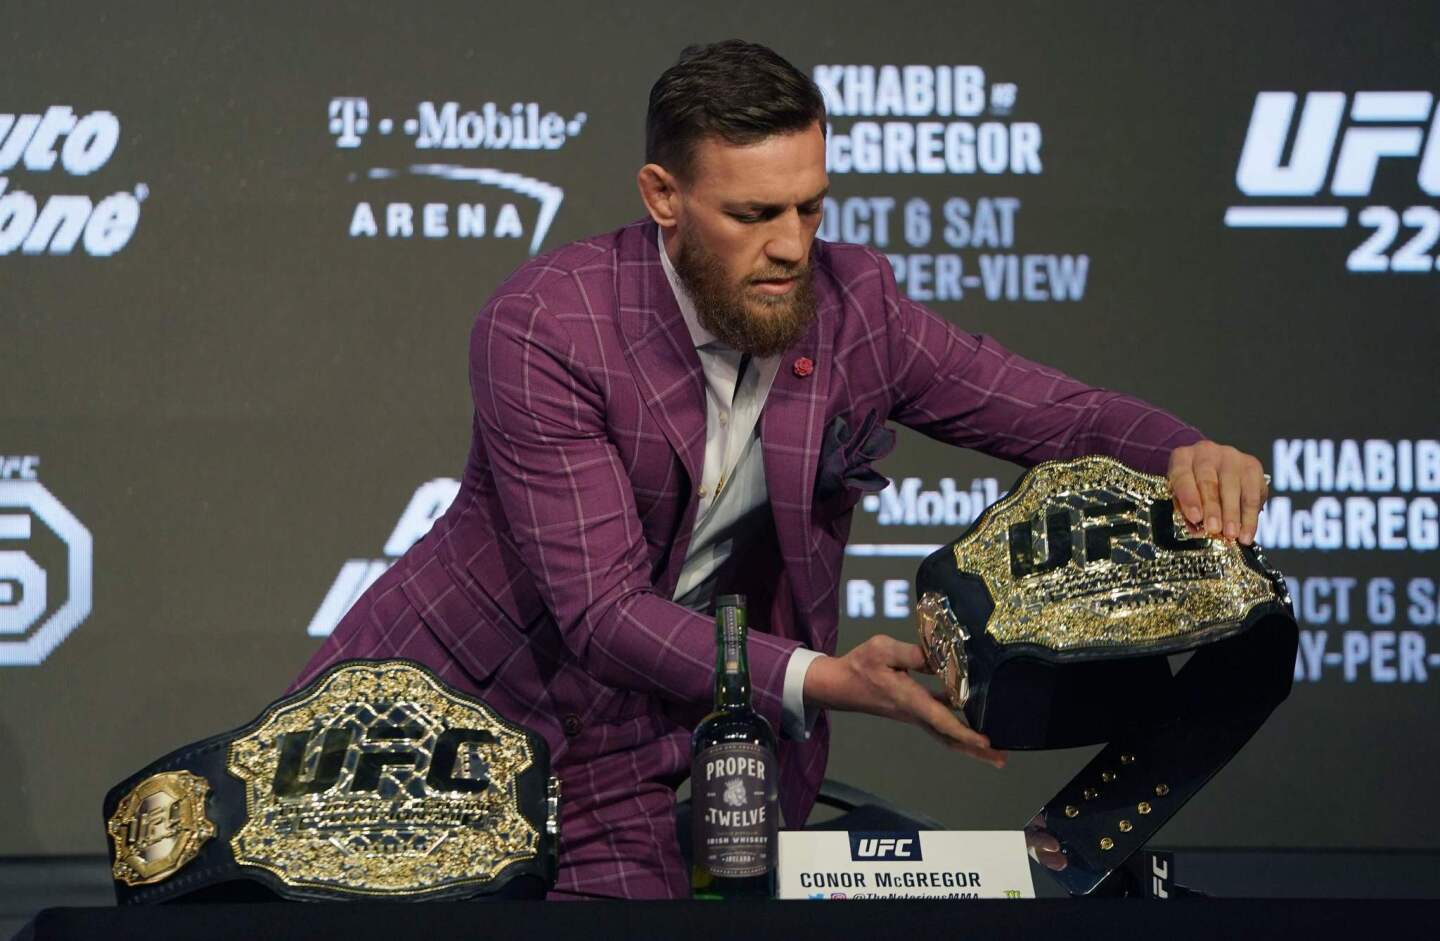 Two-division UFC champion Conor McGregor of Ireland arrives for a press conference at Radio City Music Hall in New York September 20, 2018 to announce his mixed martial arts match against UFC lightweight champion Khabib Nurmagomedov of Russia. - McGregor will face Nurmagomedov on October 6, 2018 at T-Mobile Arena in Las Vegas.. (Photo by TIMOTHY A. CLARY / AFP)TIMOTHY A. CLARY/AFP/Getty Images ** OUTS - ELSENT, FPG, CM - OUTS * NM, PH, VA if sourced by CT, LA or MoD **